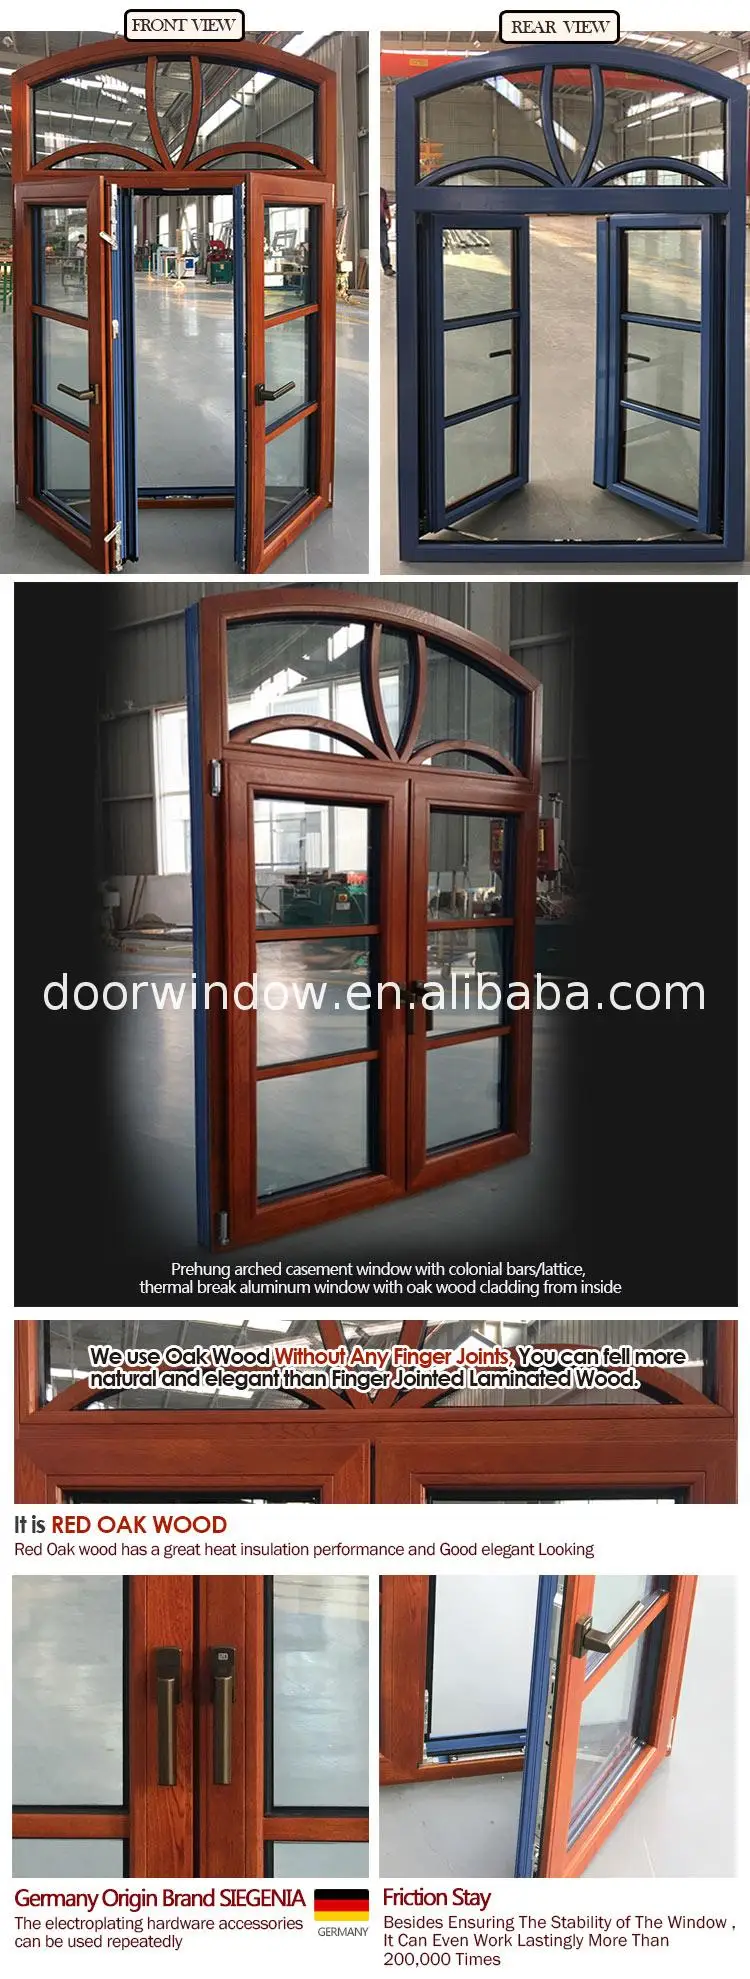 Chinese factory fitting aluminium windows timber frame exterior window cladding french